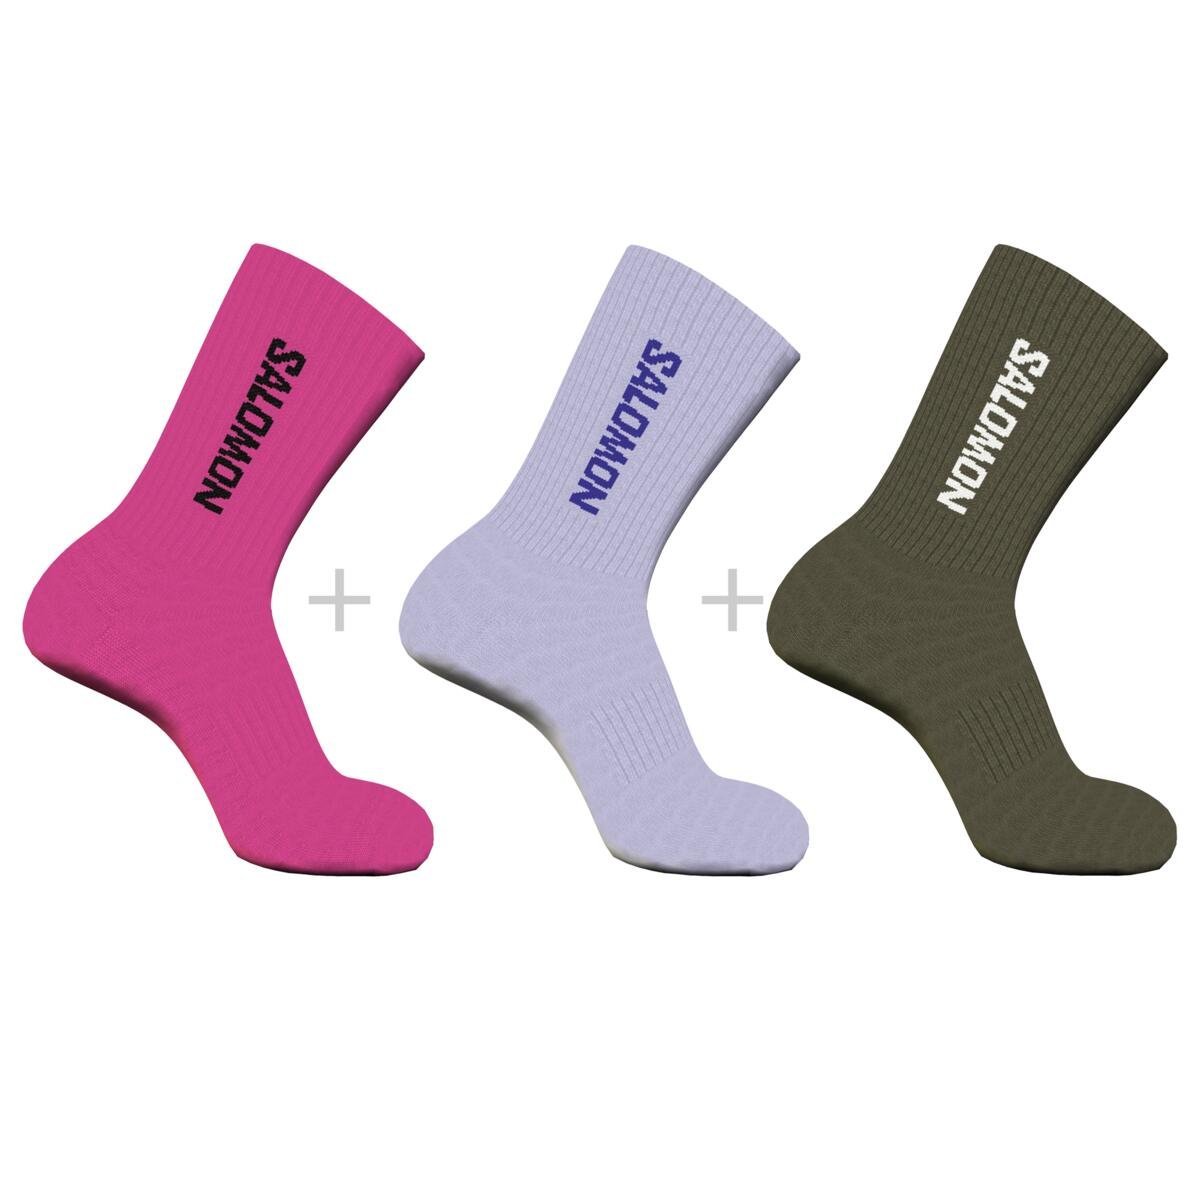 LC2376200_0_VIR_EVERYDAY CREW 3 PACK_KNOCKOUT PINK-PURPLE-OLIVE.png.cq5dam.web.1200.1200